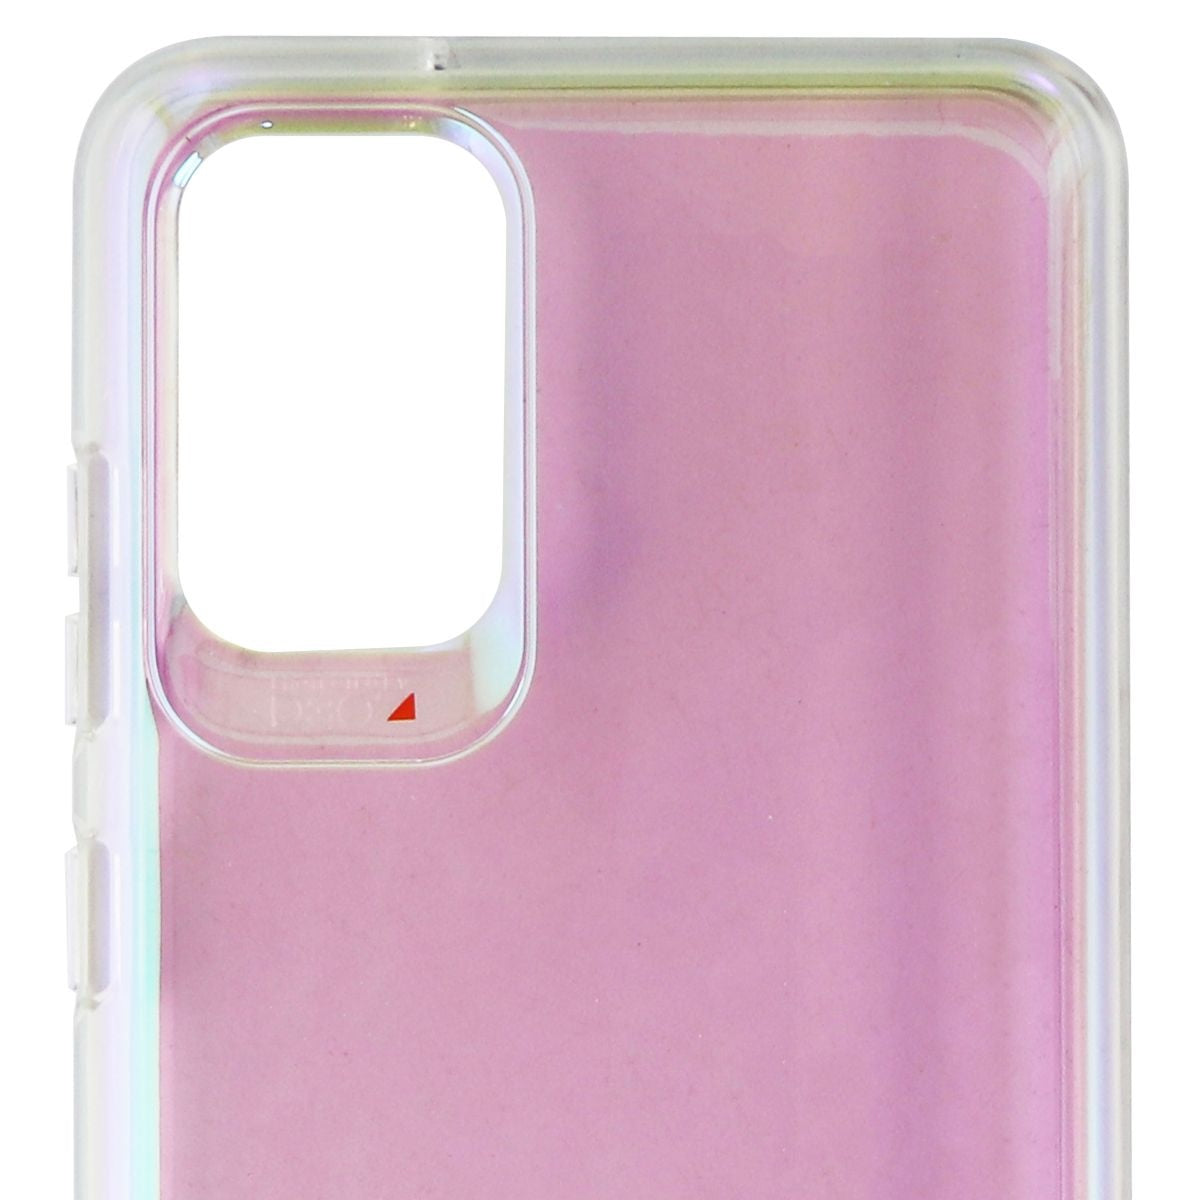 Gear4 Crystal Palace Hard Case for Samsung Galaxy (S20+) - Iridescent/Clear